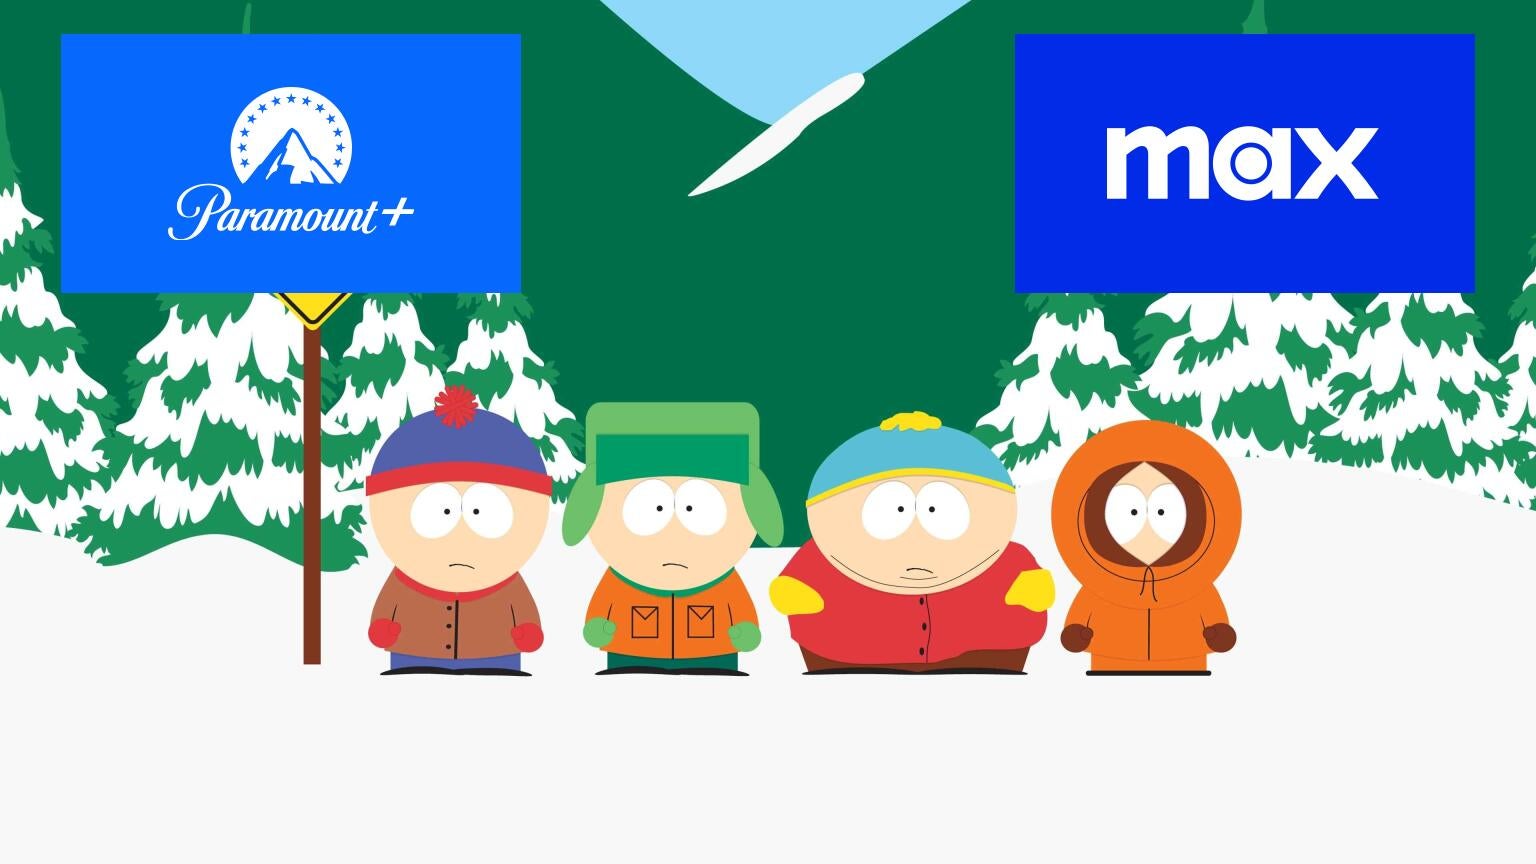 Max and Paramount+ both host some "South Park" content, but a lawsuit between their parent companies has muddied the waters.